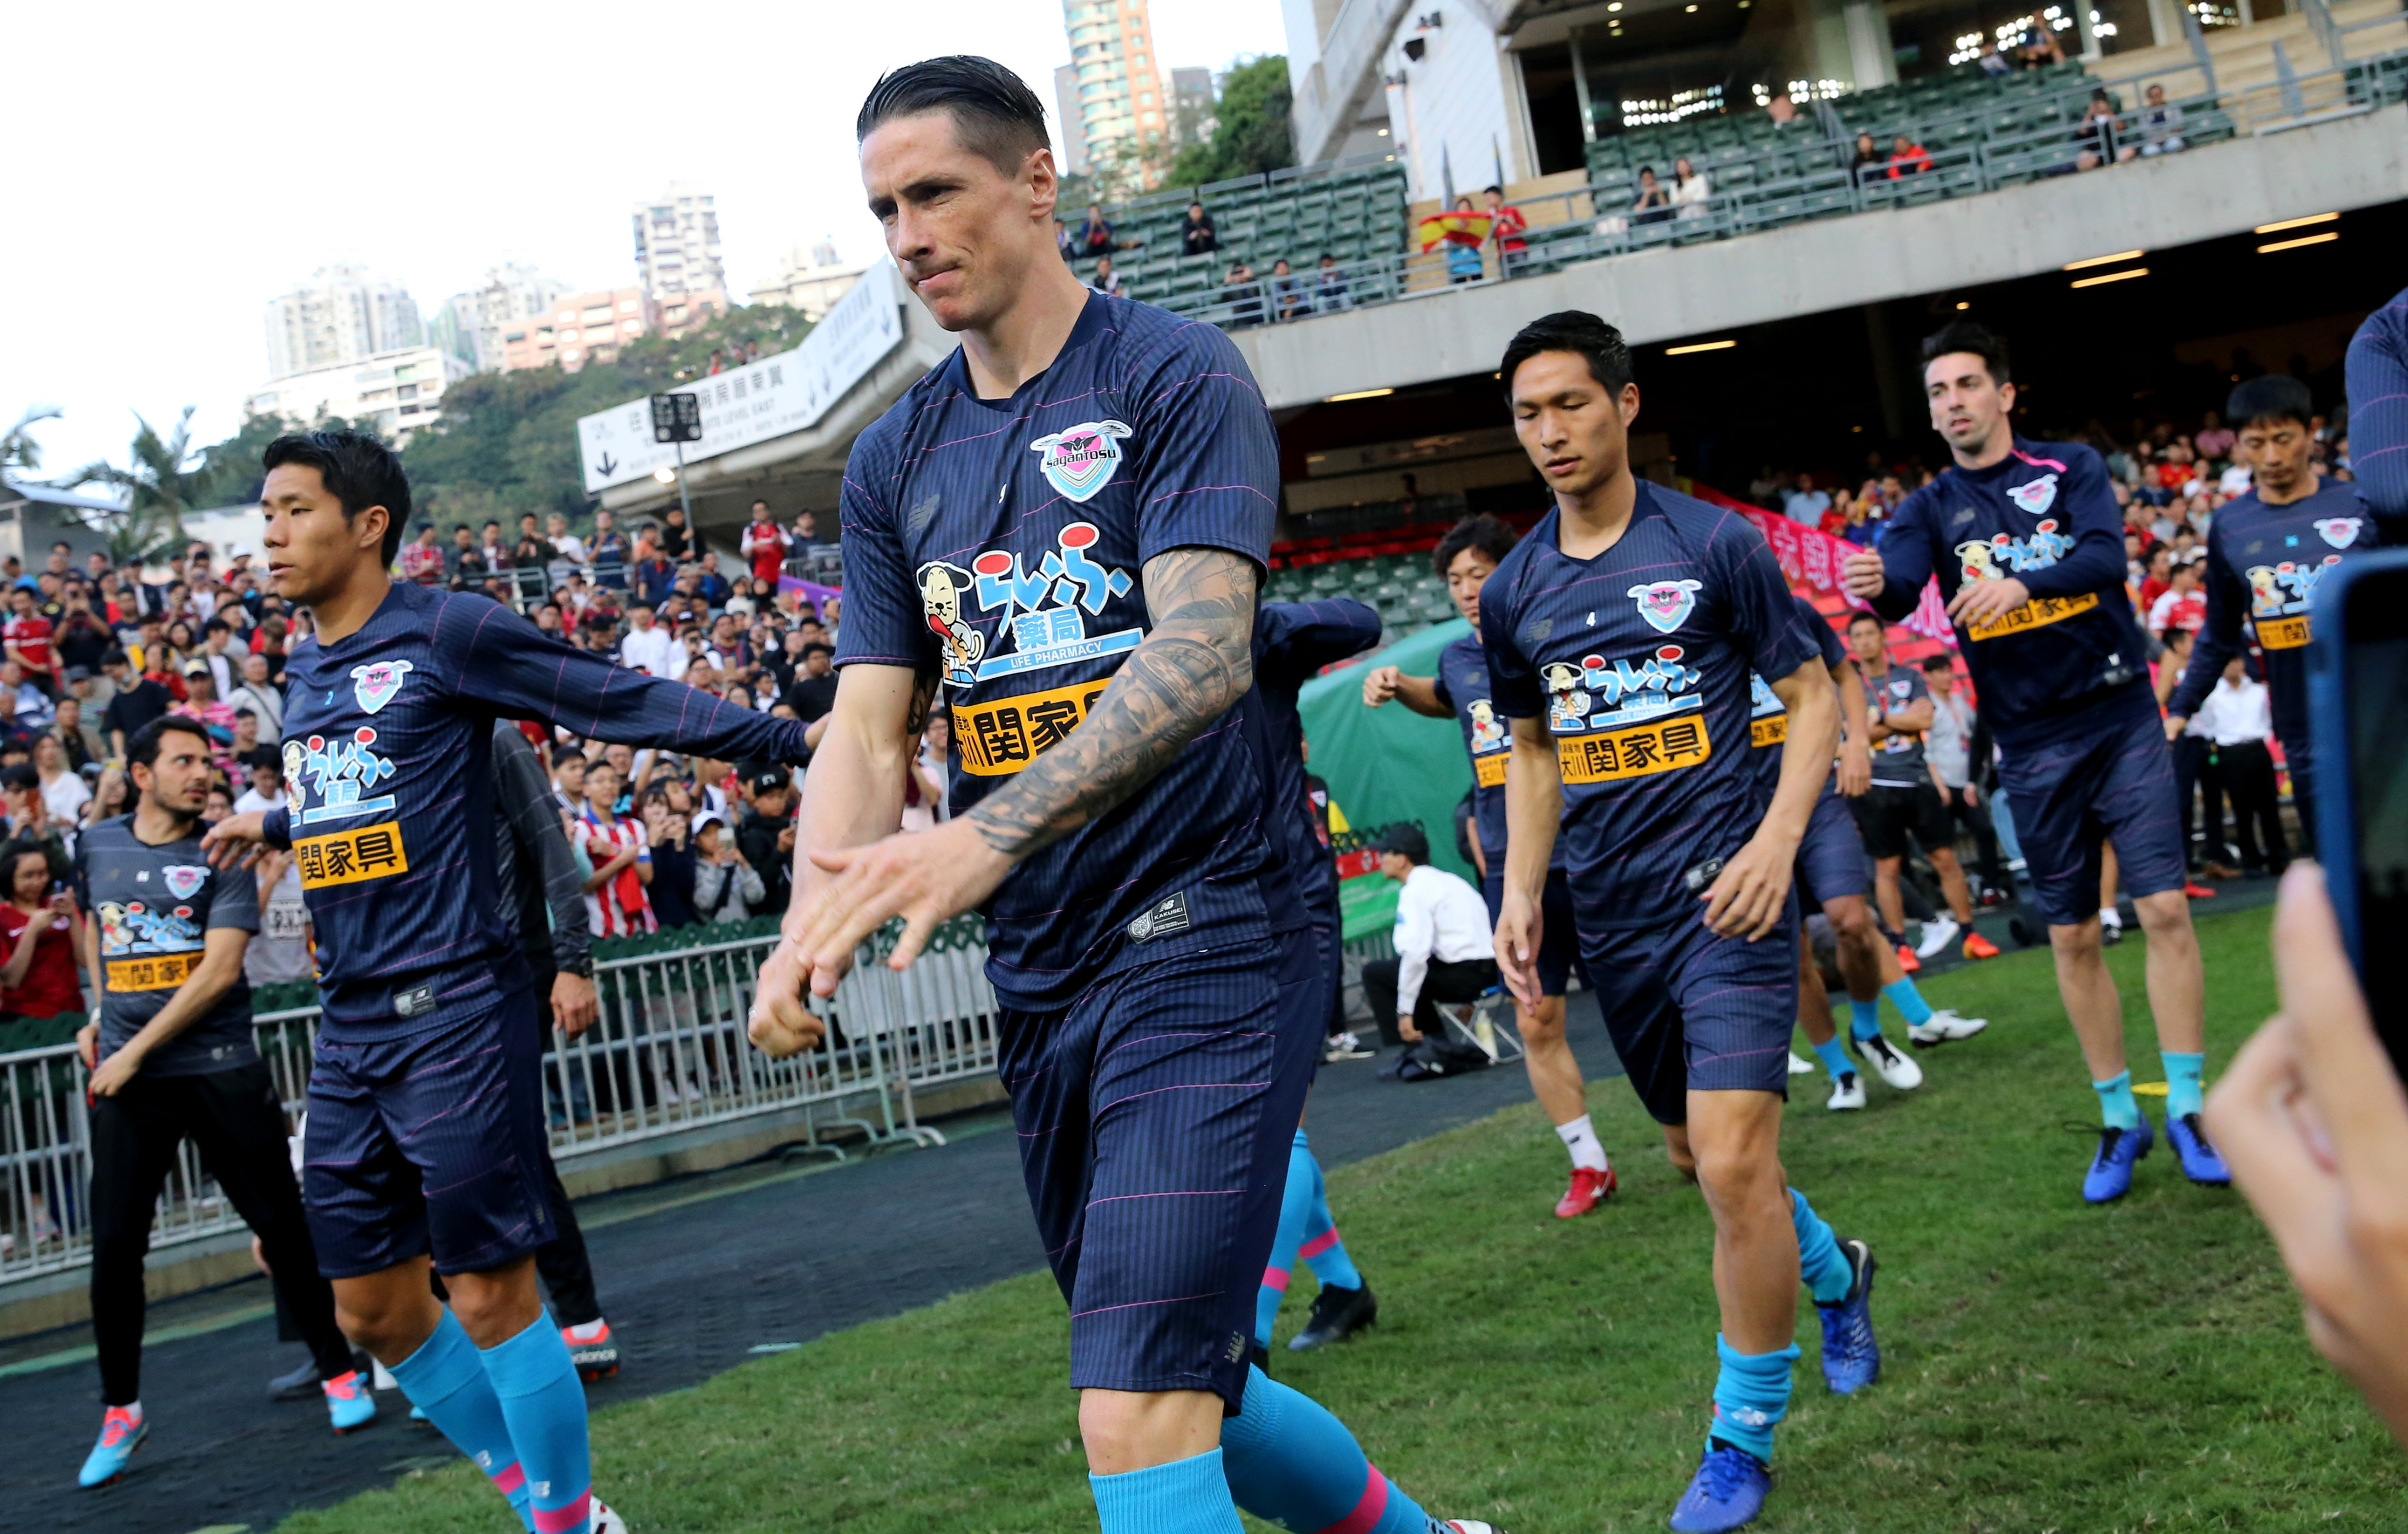 Spanish striker Fernando Torres (centre) of Sagan Tosu from Japan prepares for the 2019 Lunar New Year Cup final against Shandong Luneng. Photo: Dickson Lee